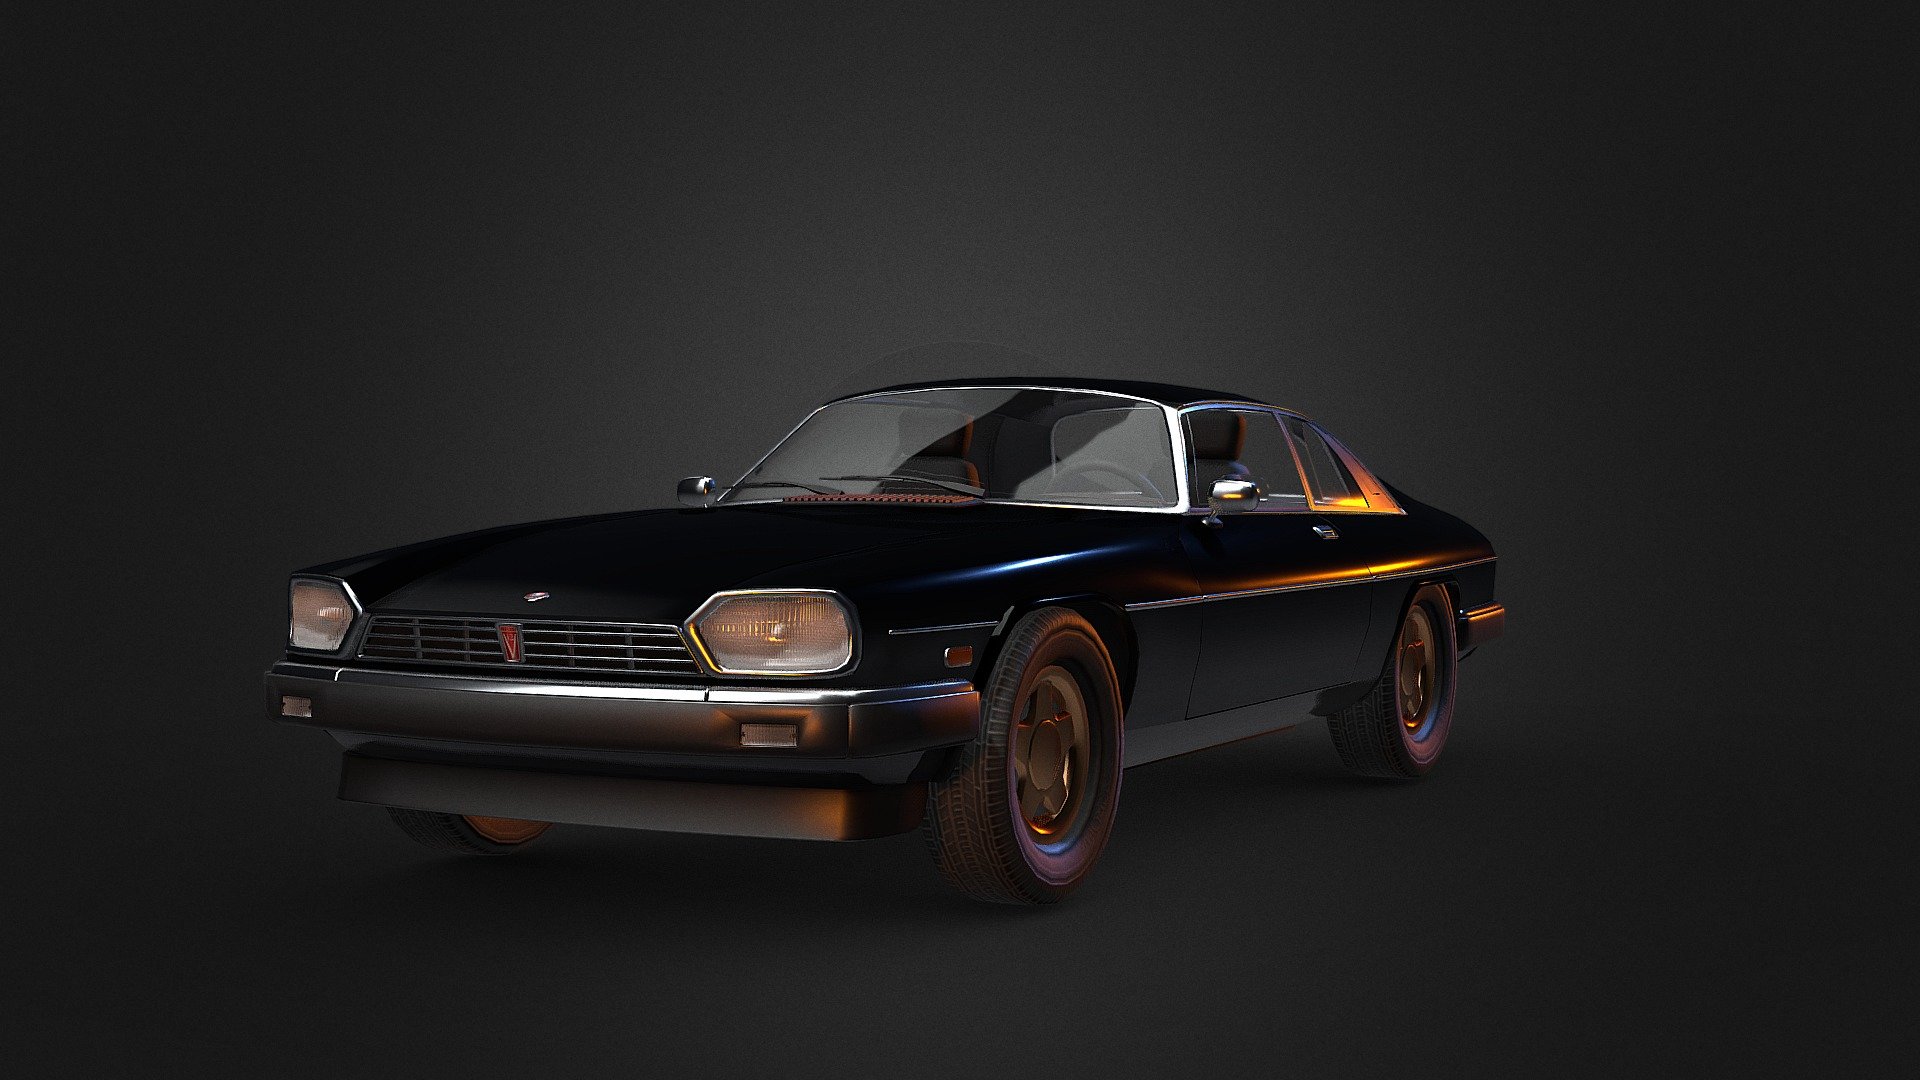 Low poly vechicle model of Jaguar XJ-S 
Software used: 
Model - Blender Texture 
Quixel Mixer and Photoshop - Low-poly Jaguar XJ-S - Download Free 3D model by Artyom (@art_yom_3d) 3d model